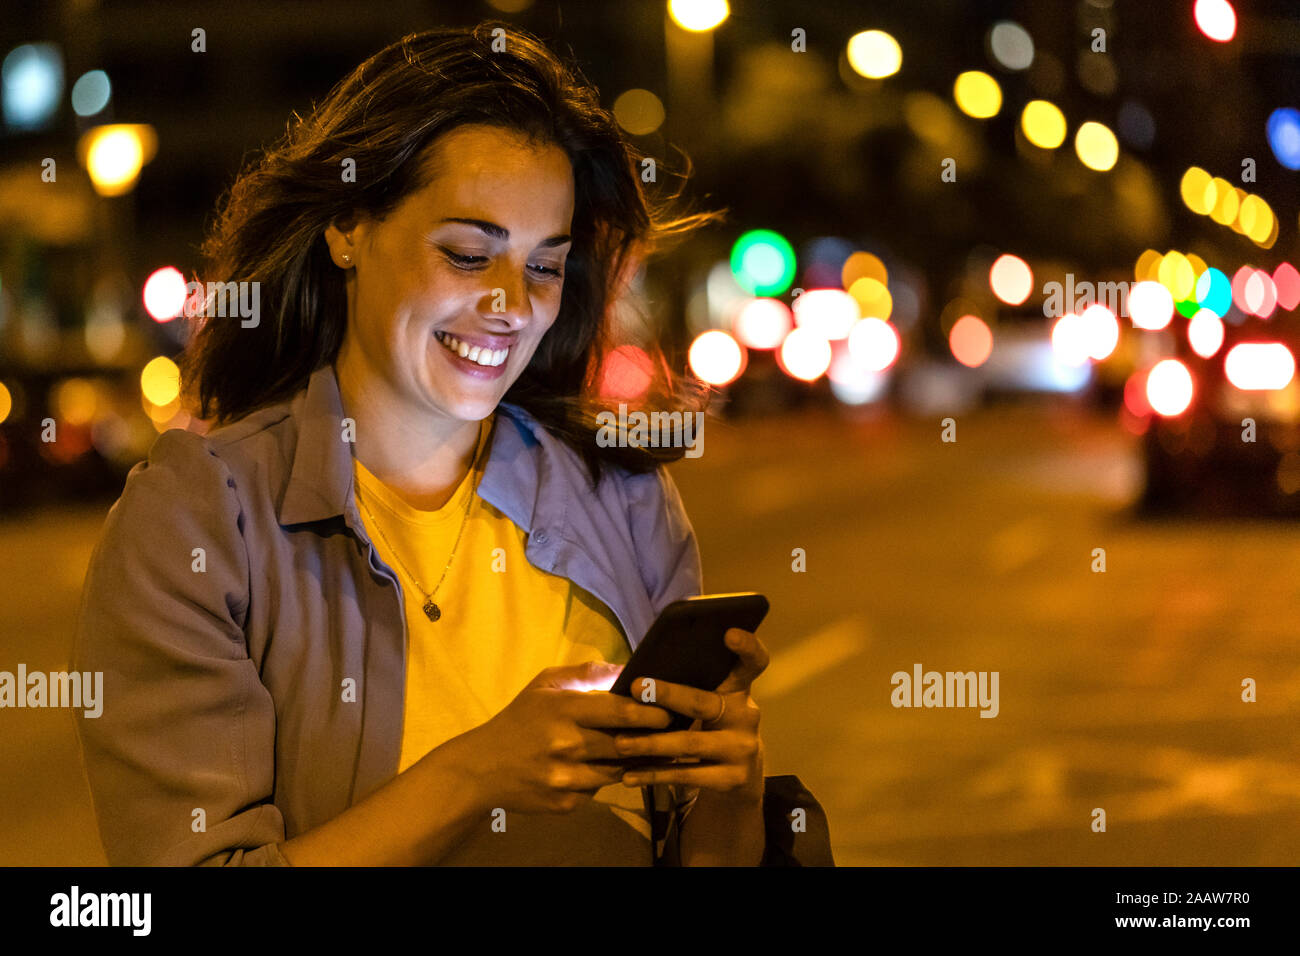 Young woman using smartphone in the city at night Stock Photo